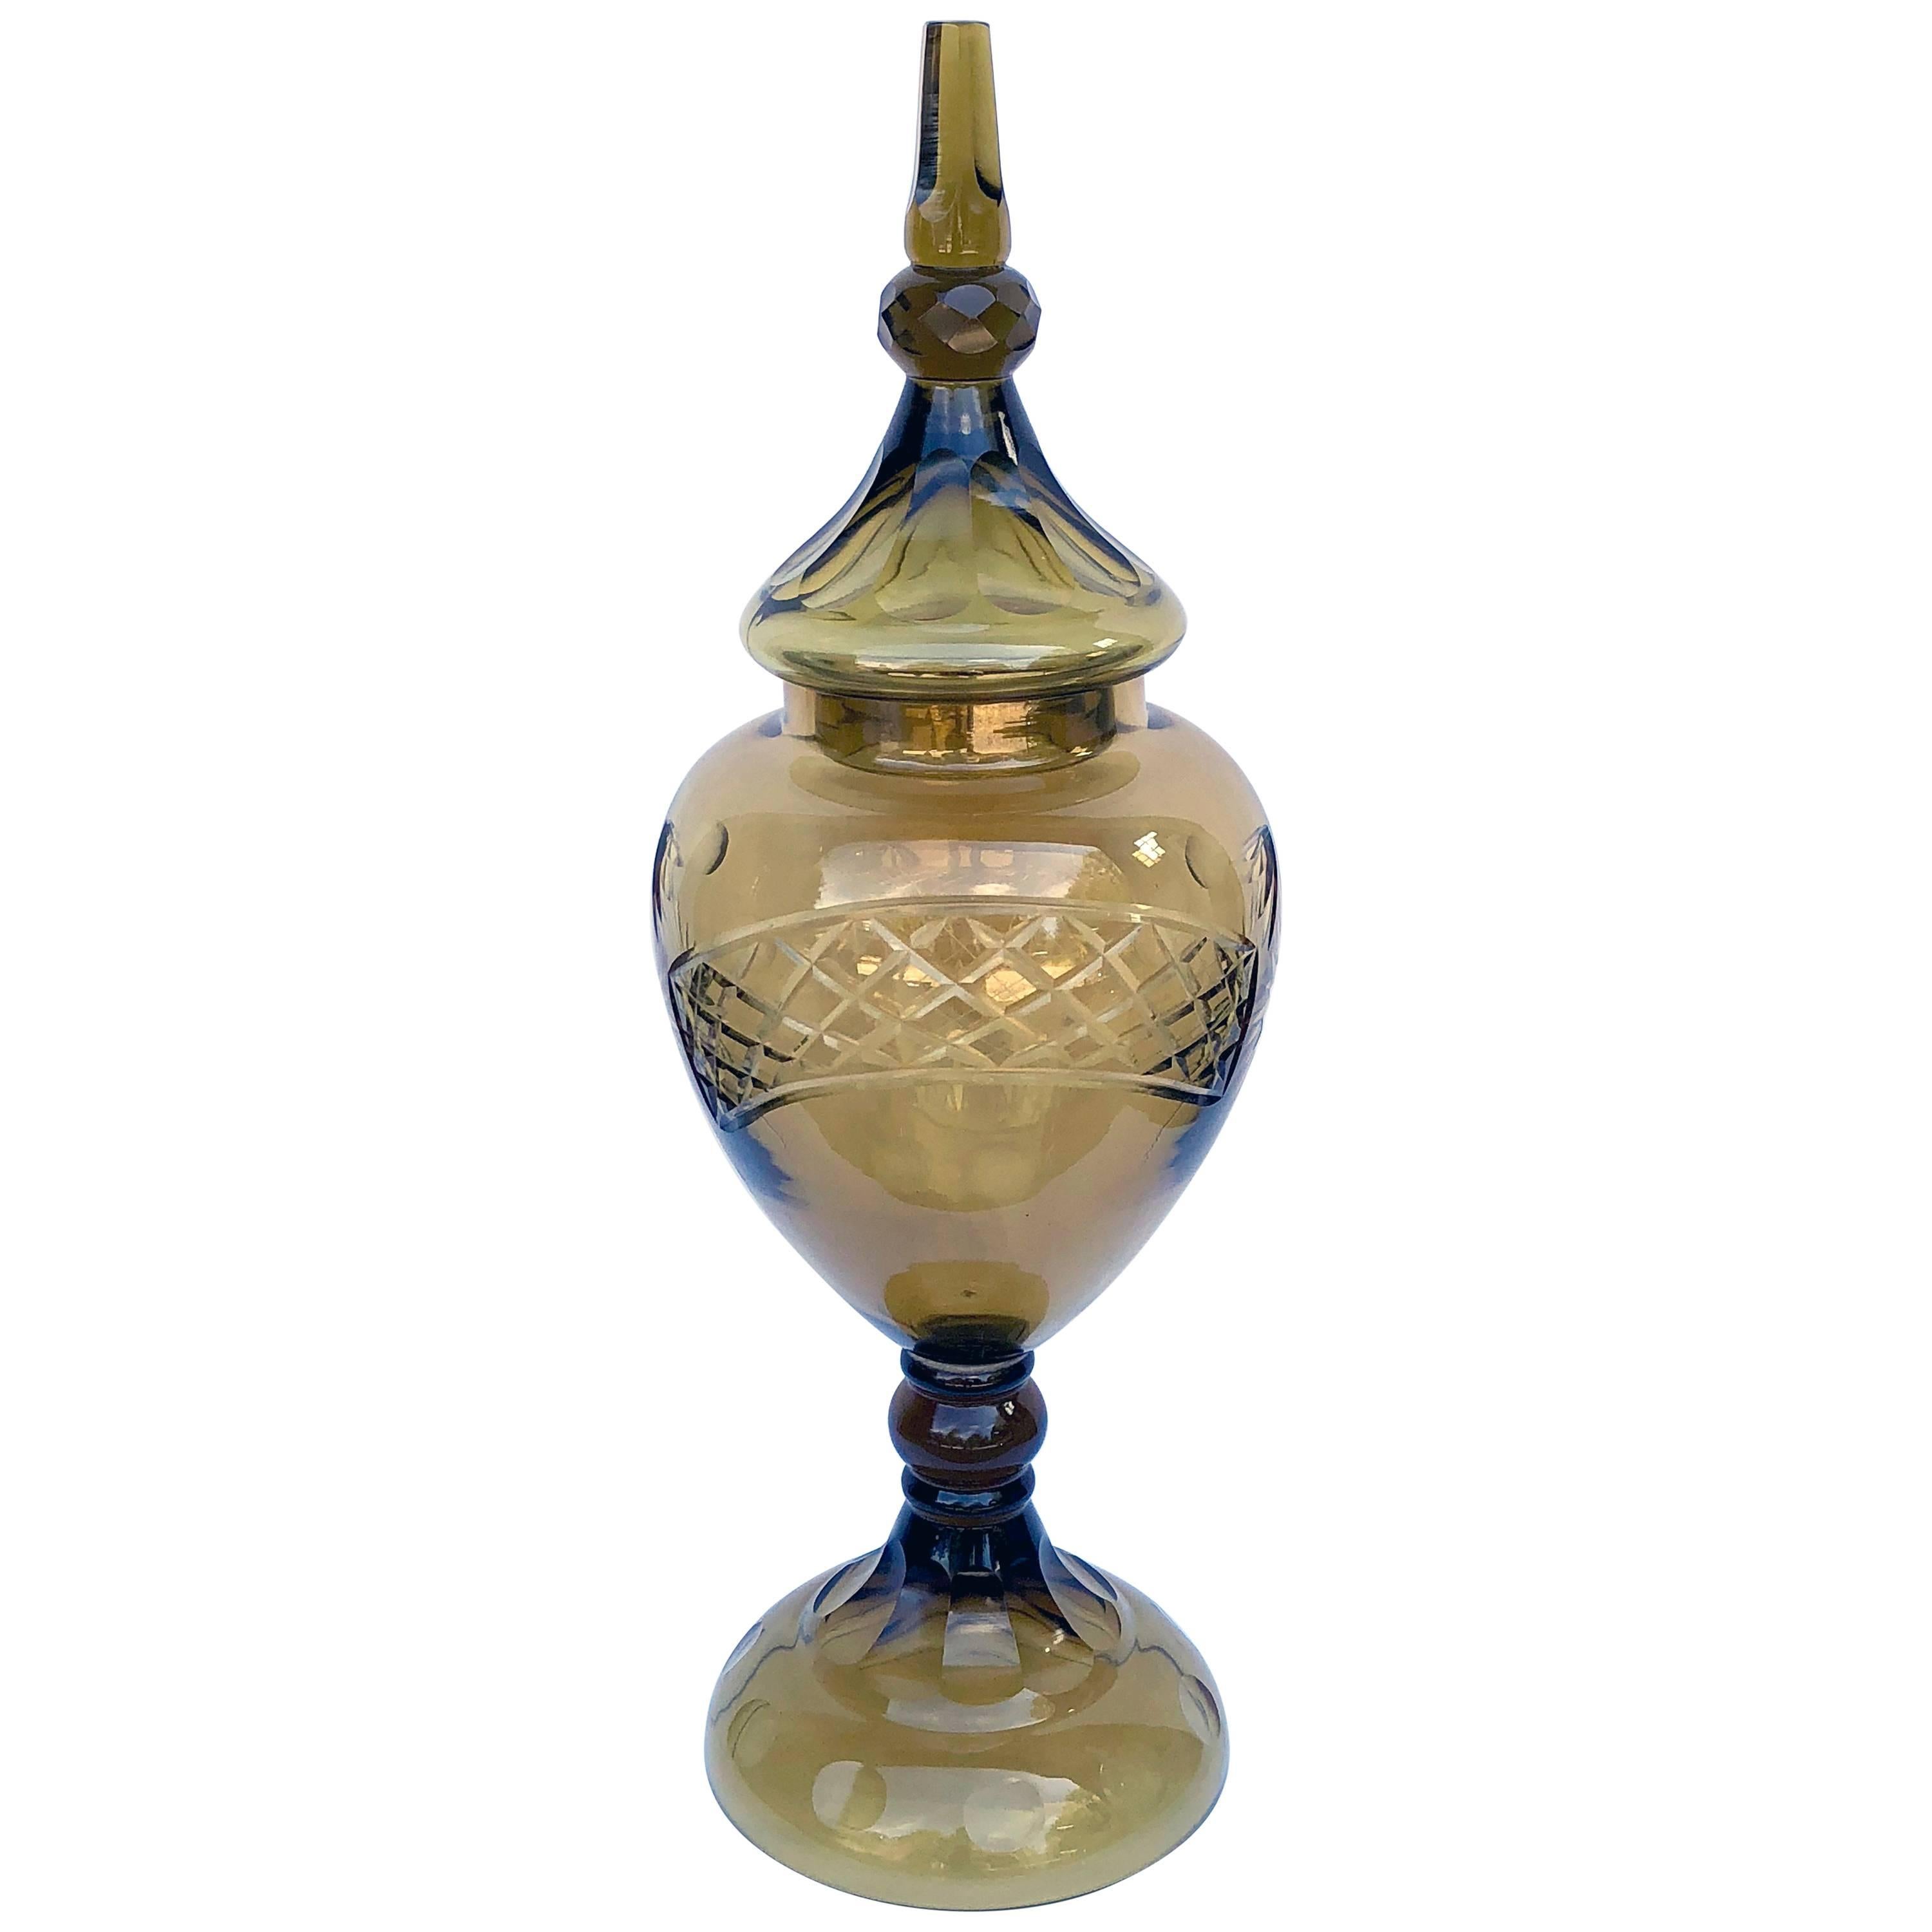 Striking and Large Bohemian Russet-Colored Glass Covered Urn